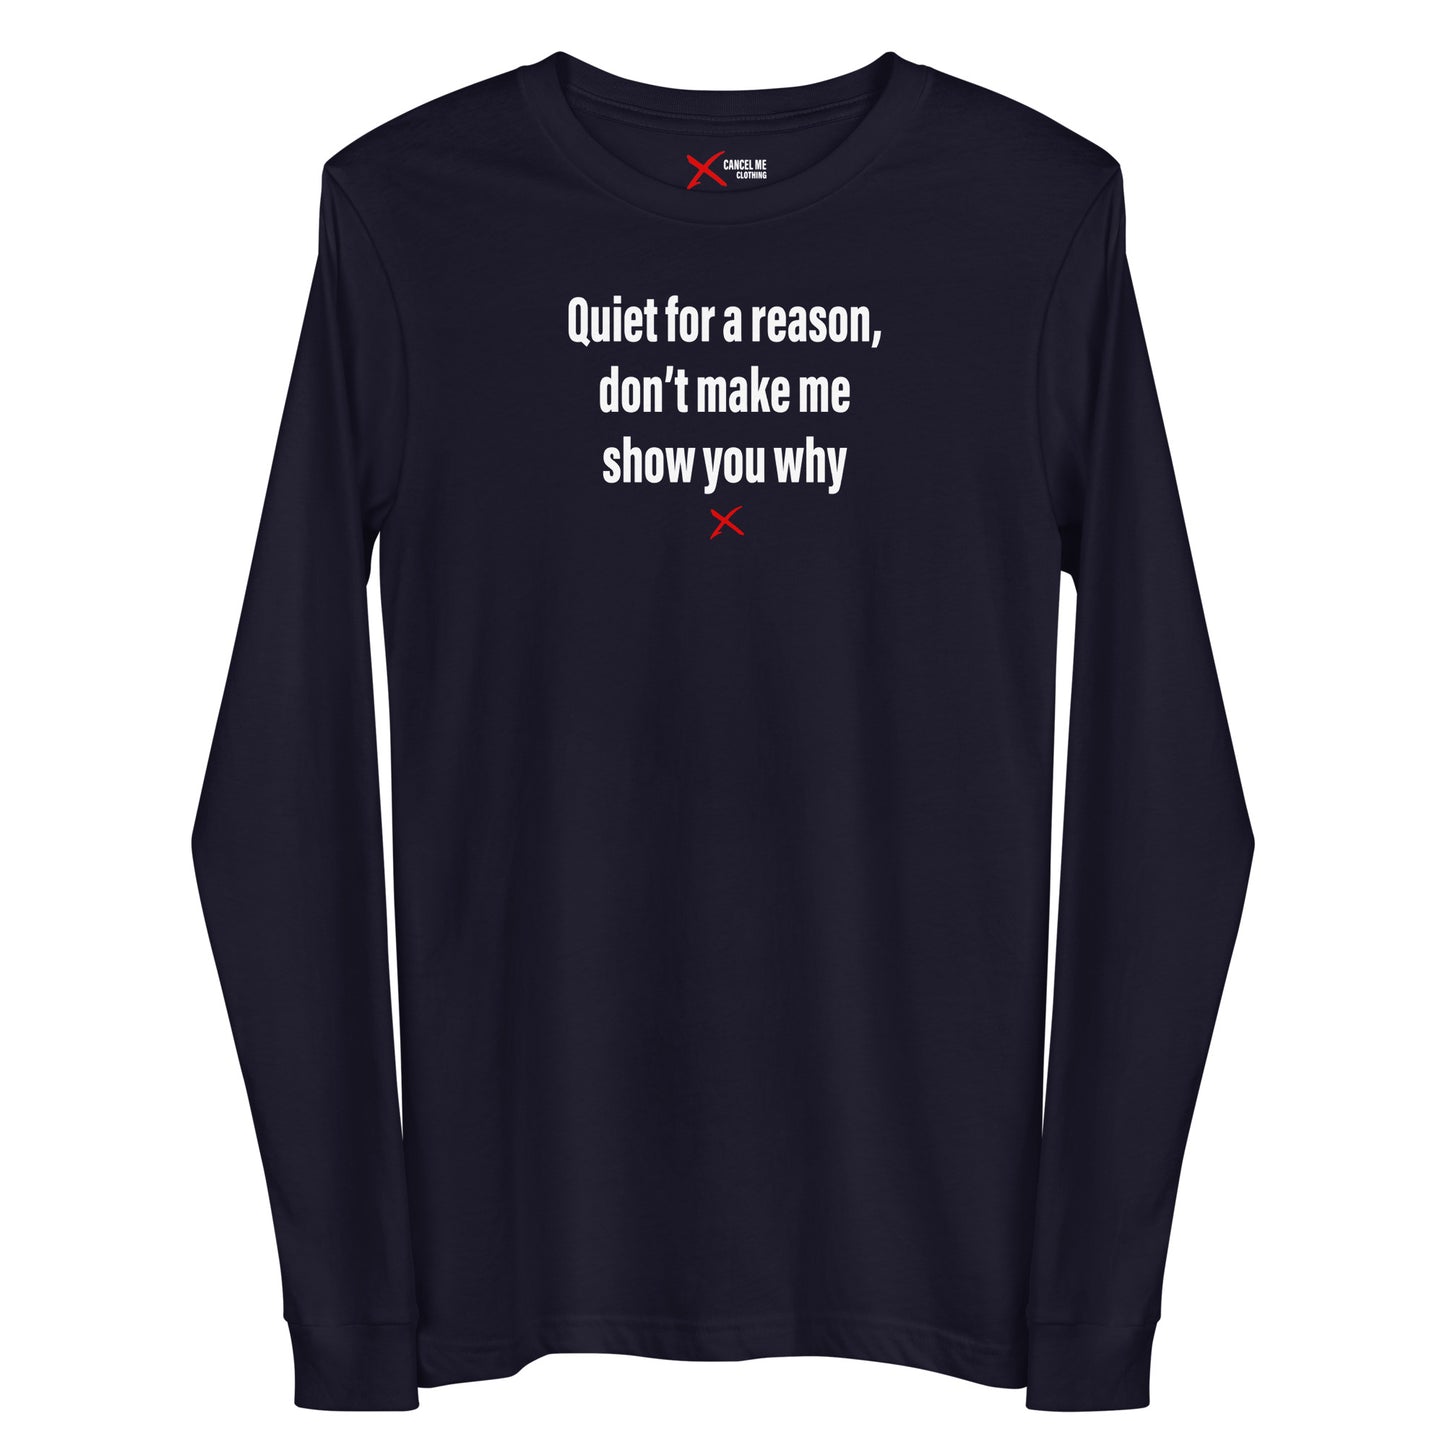 Quiet for a reason, don't make me show you why - Longsleeve